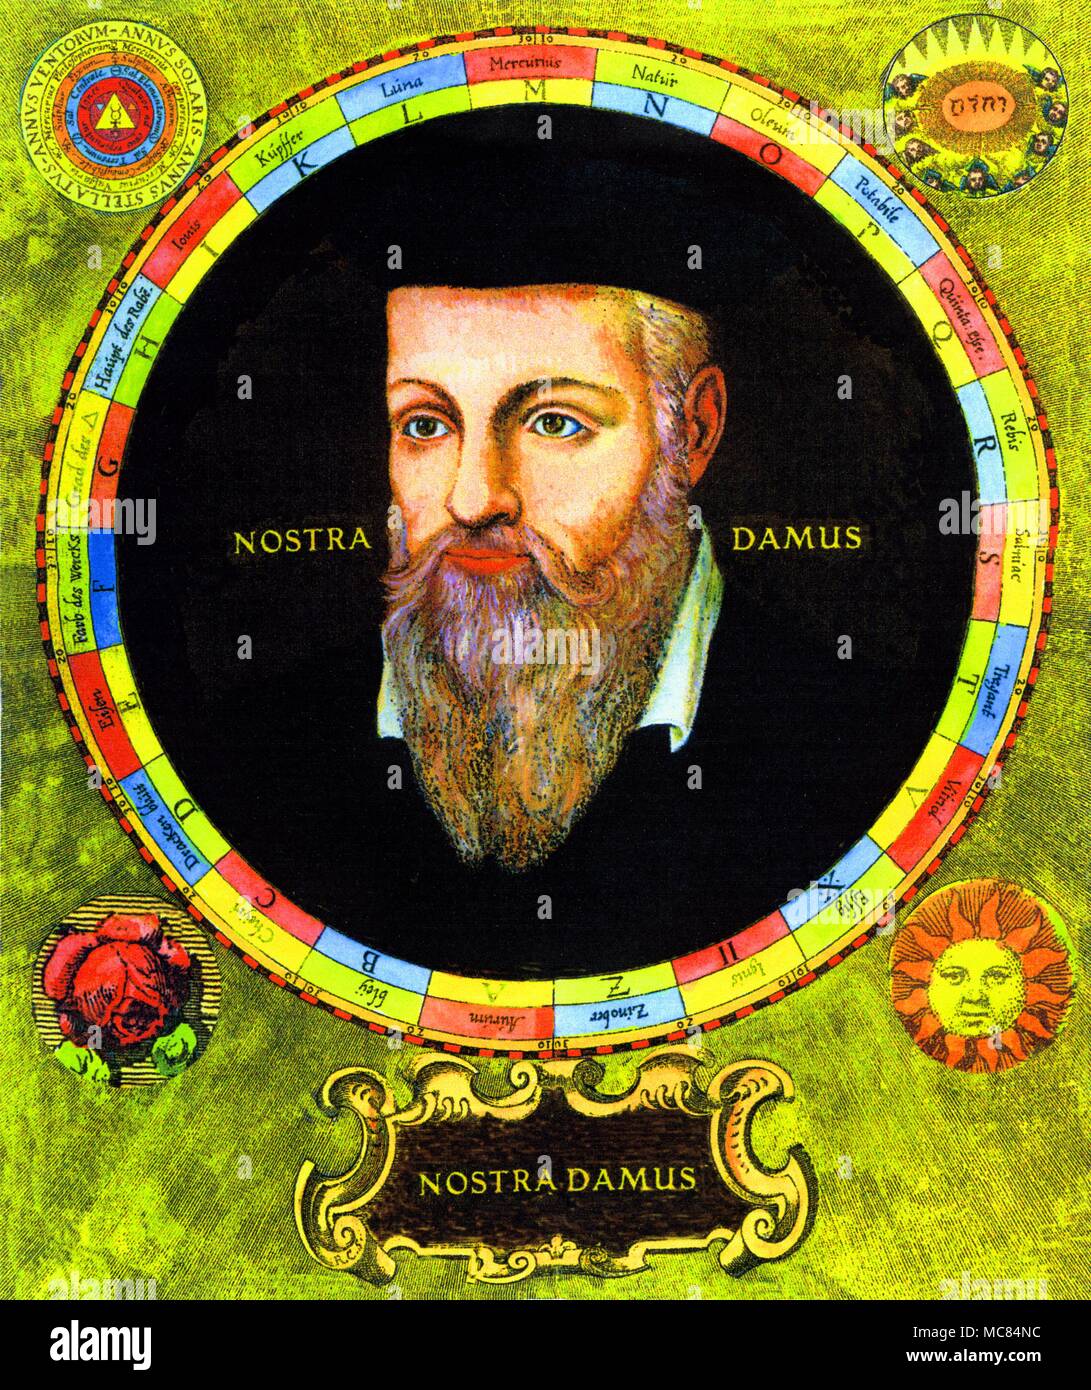 Circular portrait of Nostradamus, set within a framework of arcane symbols derived from the alchemical tradition. Stock Photo